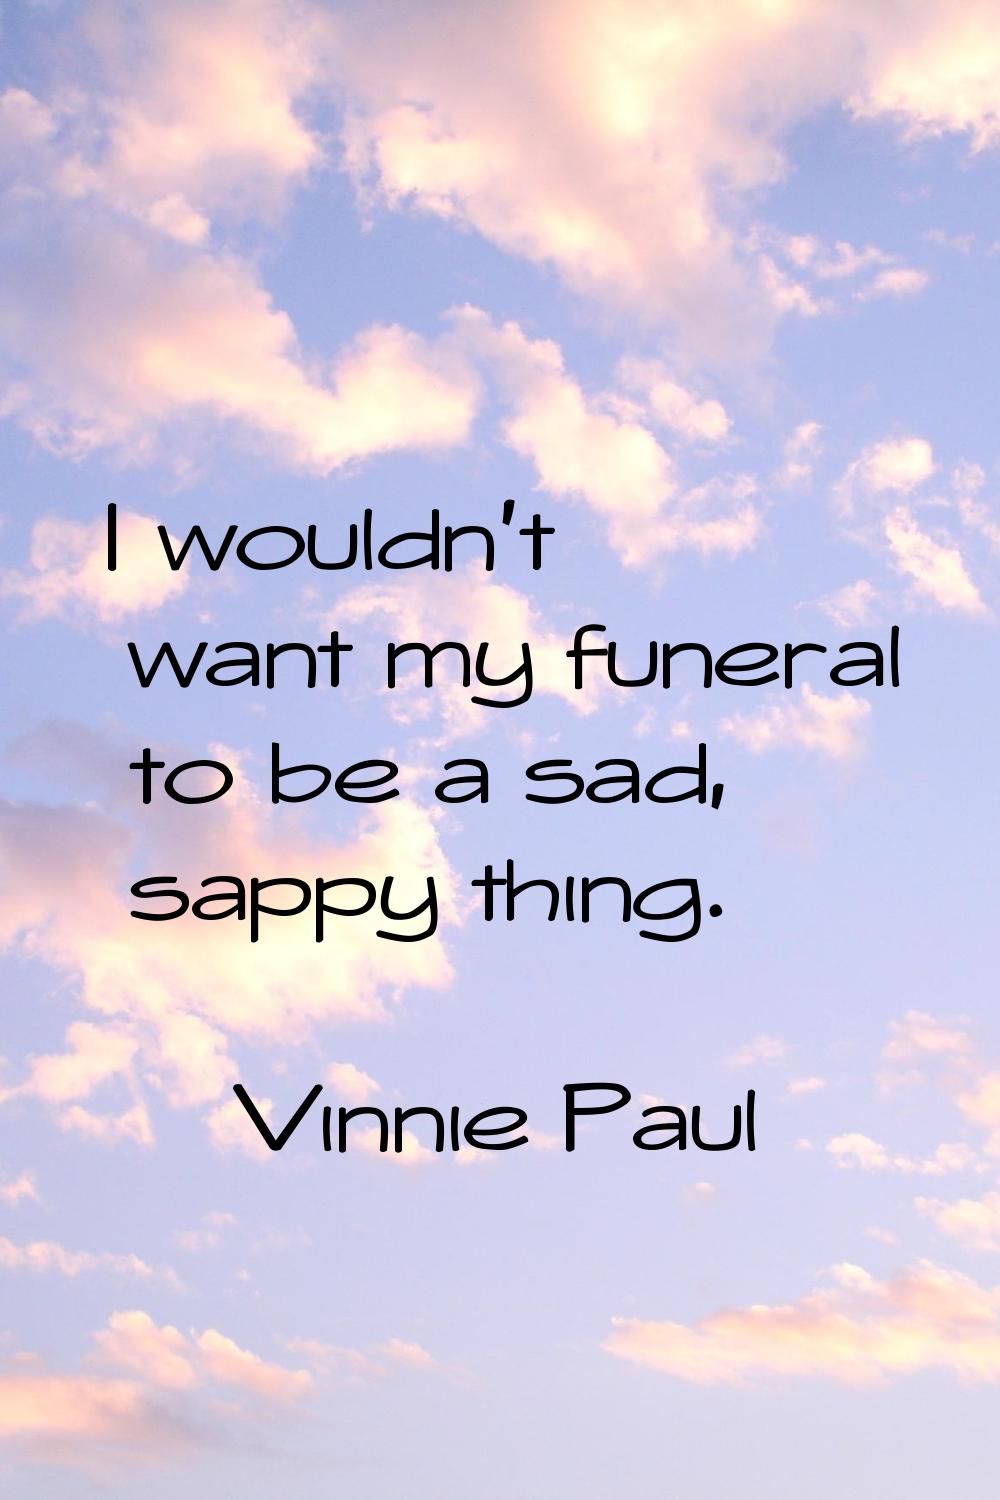 I wouldn't want my funeral to be a sad, sappy thing.